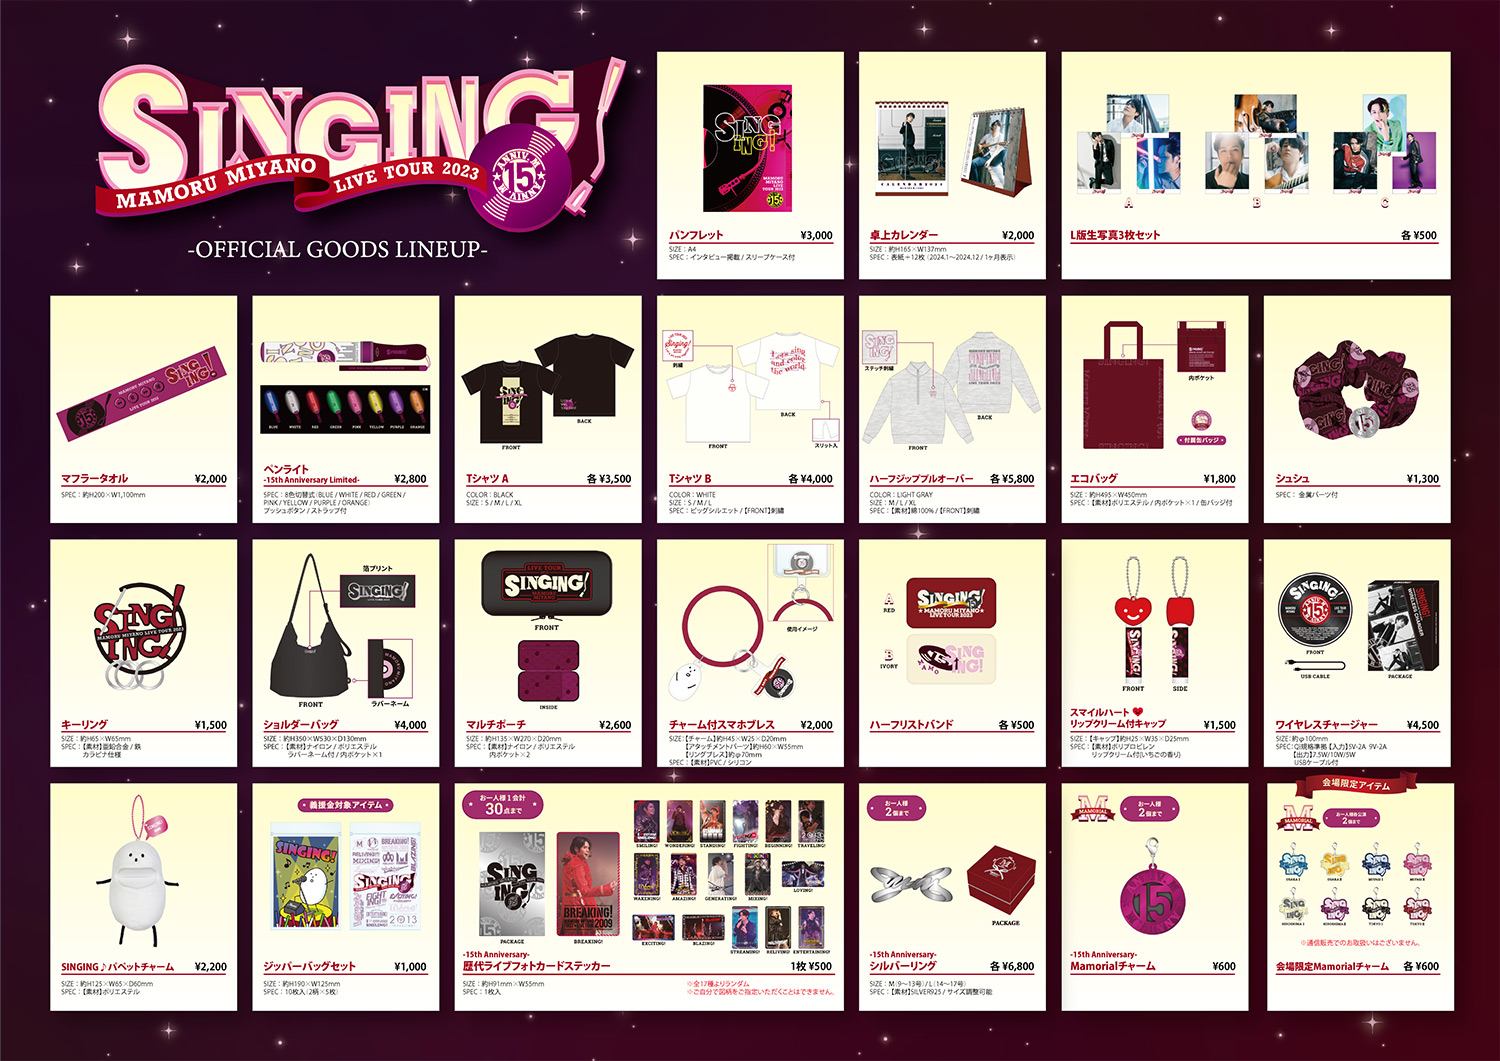 SINGING! OFFICIAL GOODS LINEUP